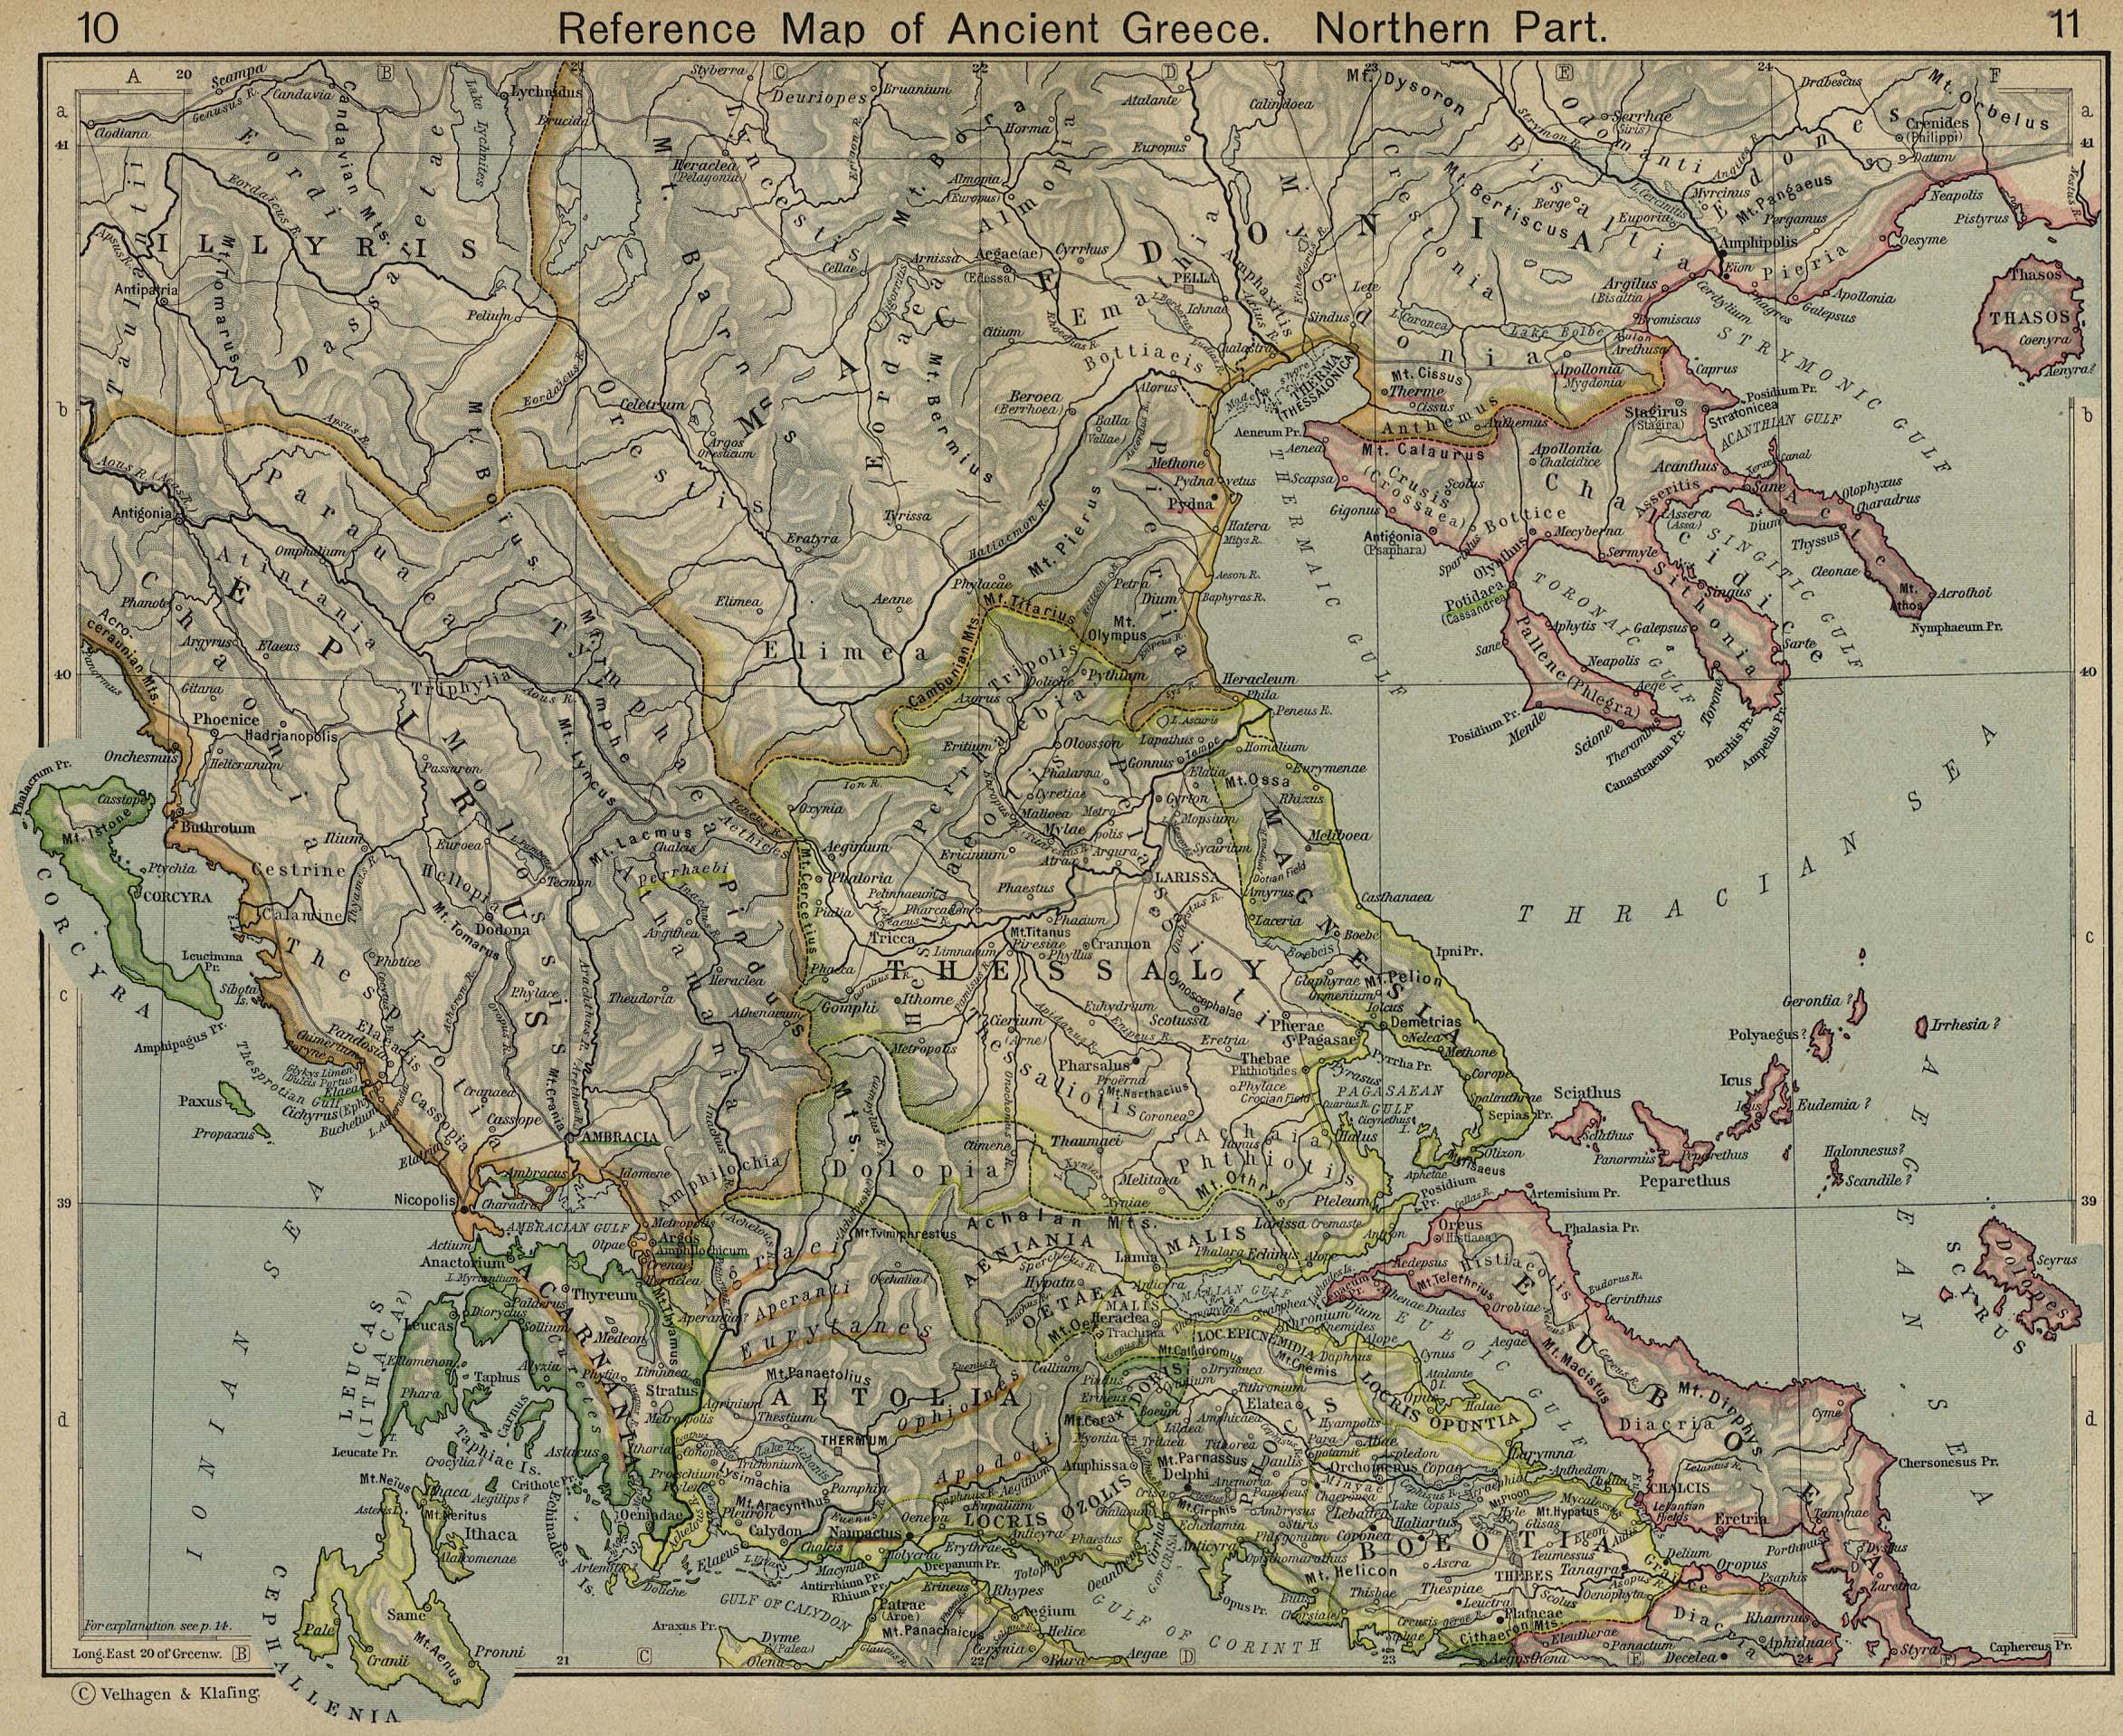 Map of Northern Greece403 BC - AD 180